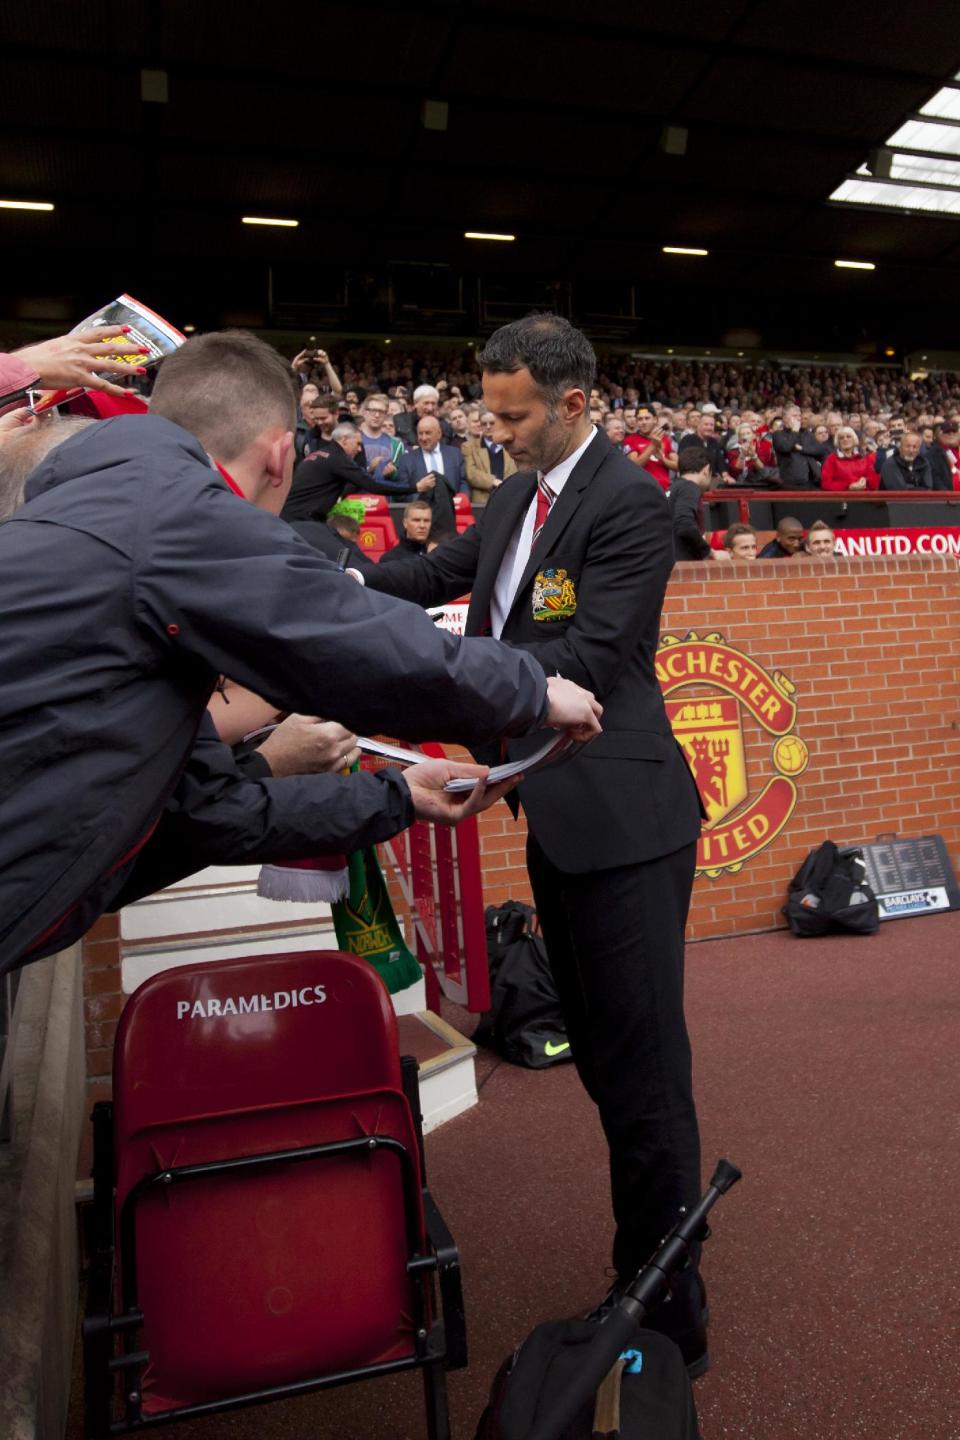 Manchester United's interim manager Ryan Giggs signs autographs as he takes to the touchline before his team's English Premier League soccer match against Norwich City at Old Trafford Stadium, Manchester, England, Saturday April 26, 2014. (AP Photo/Jon Super)